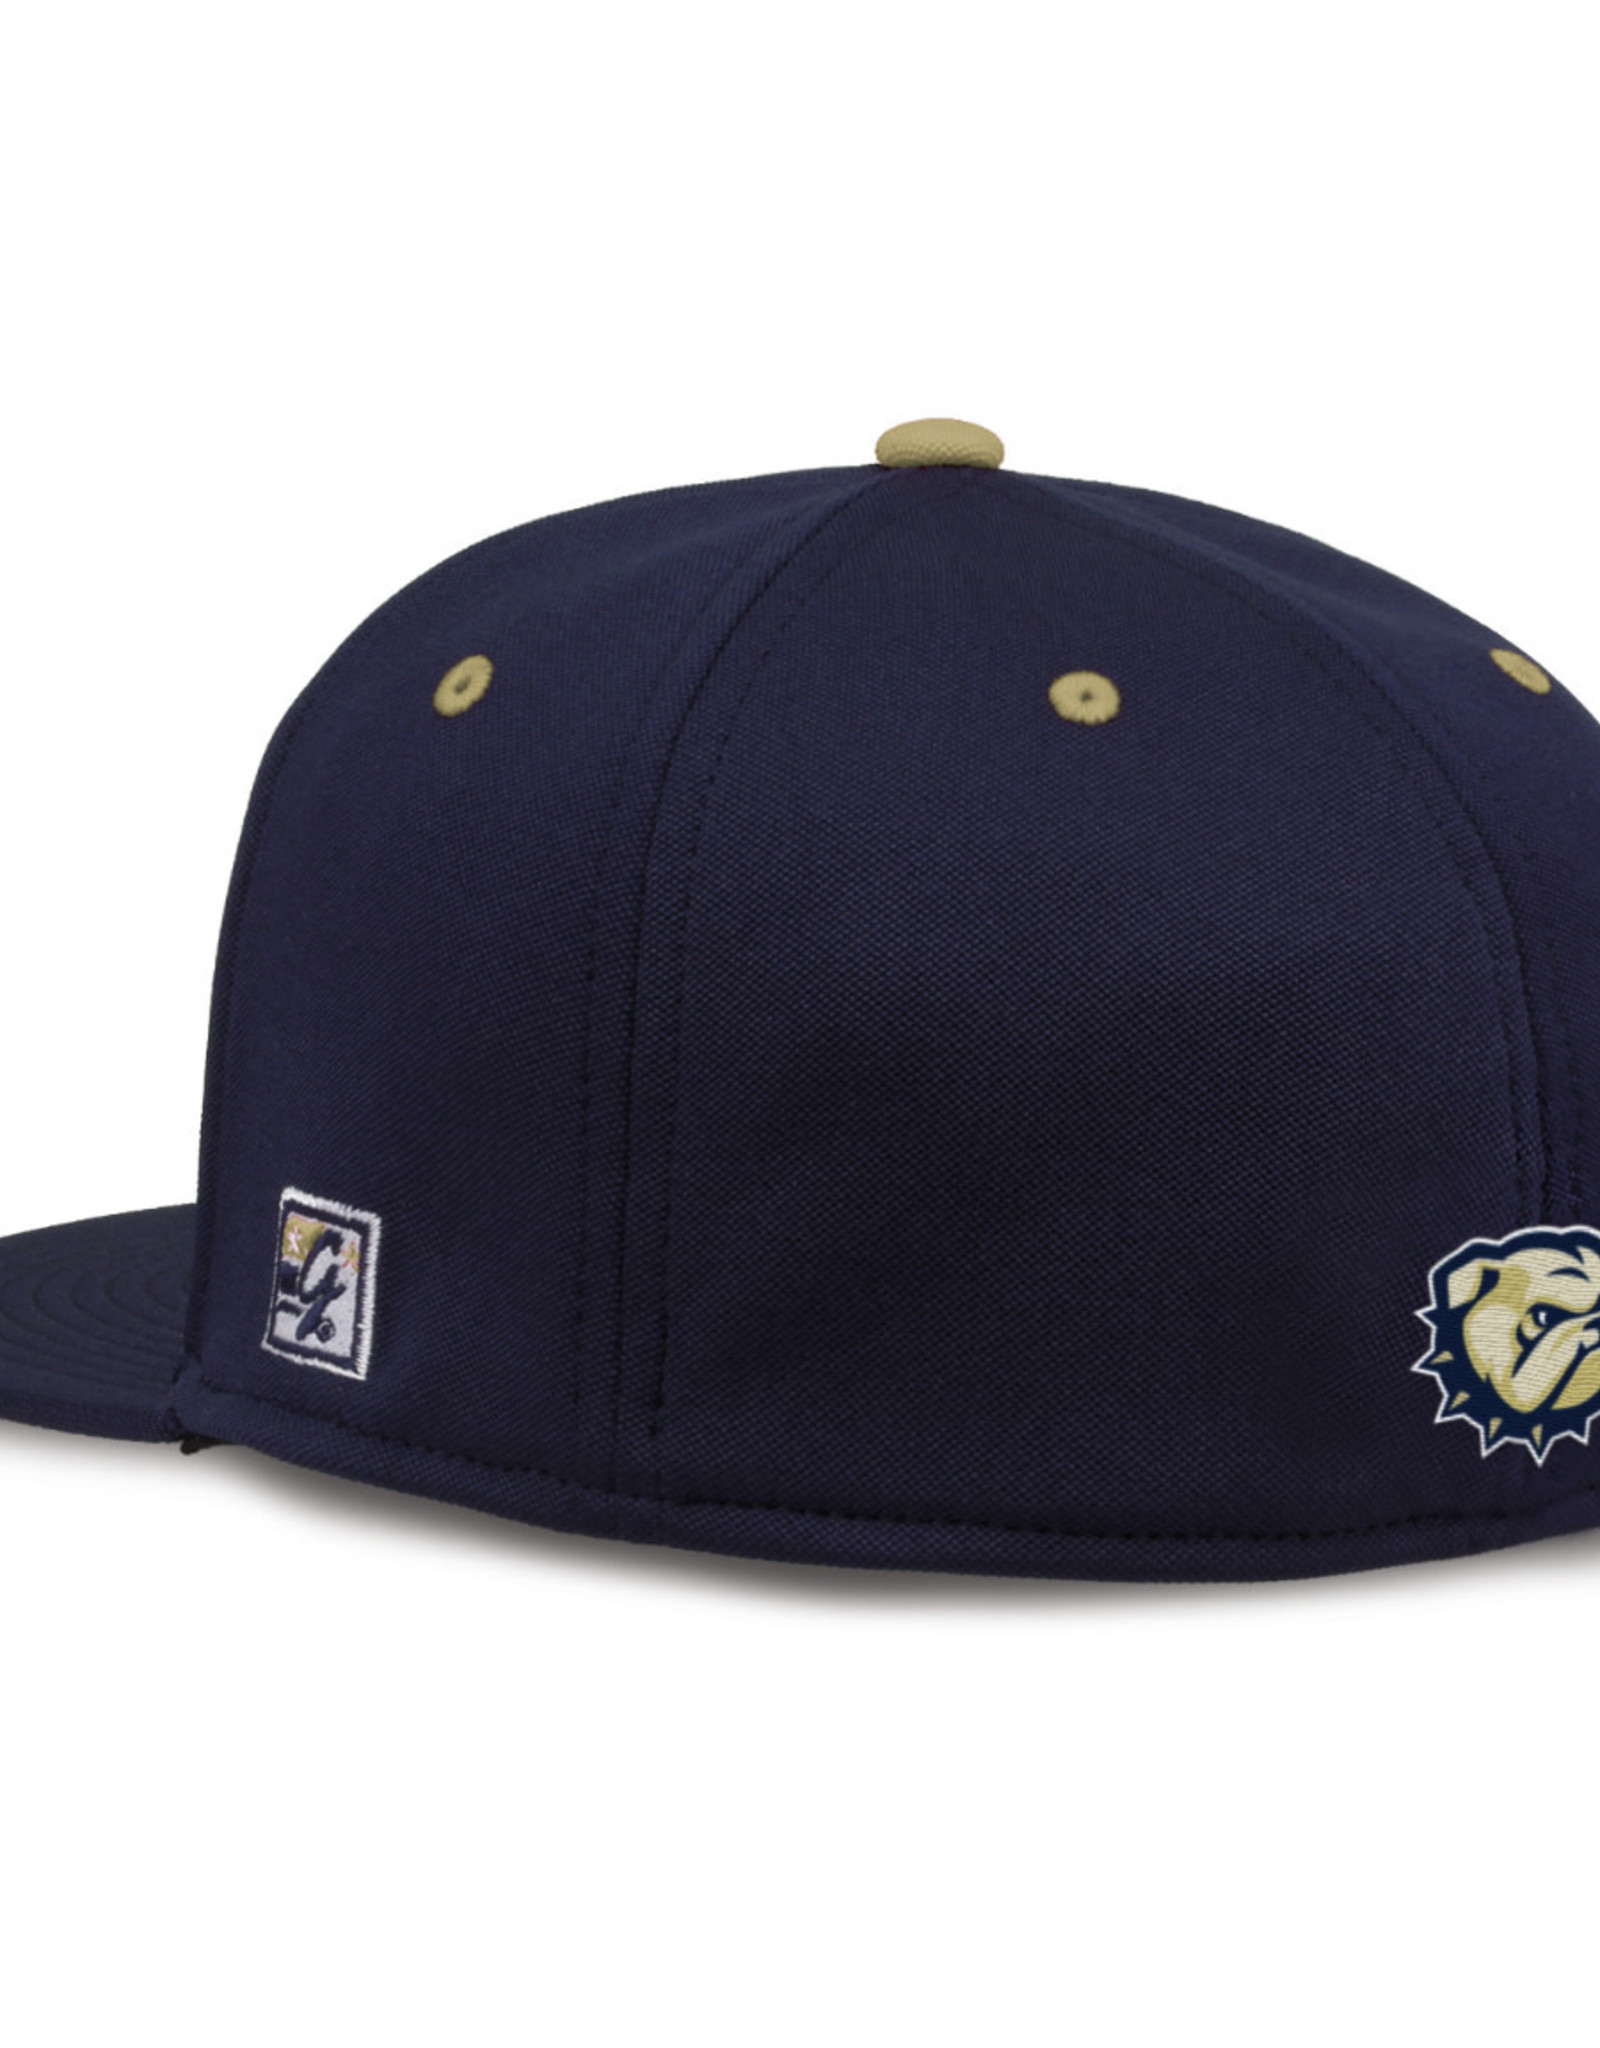 The Game Navy Flat Bill Gold W Structured Stretch Fit Hat